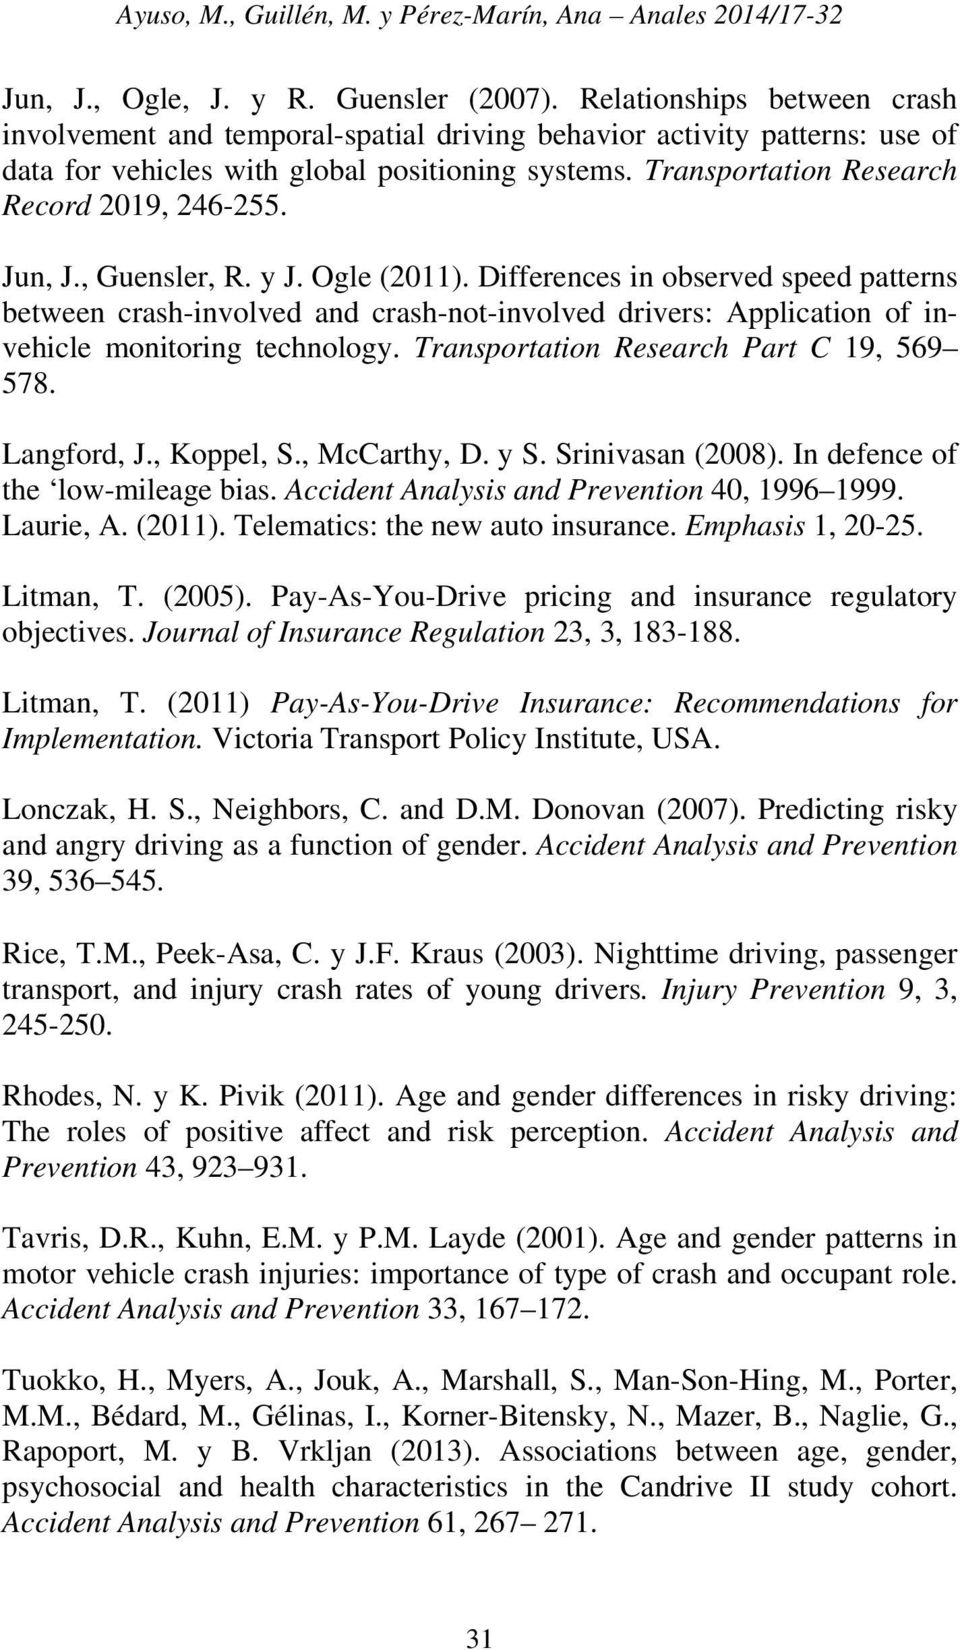 Jun, J., Guensler, R. y J. Ogle (2011). Differences in observed speed patterns between crash-involved and crash-not-involved drivers: Application of invehicle monitoring technology.